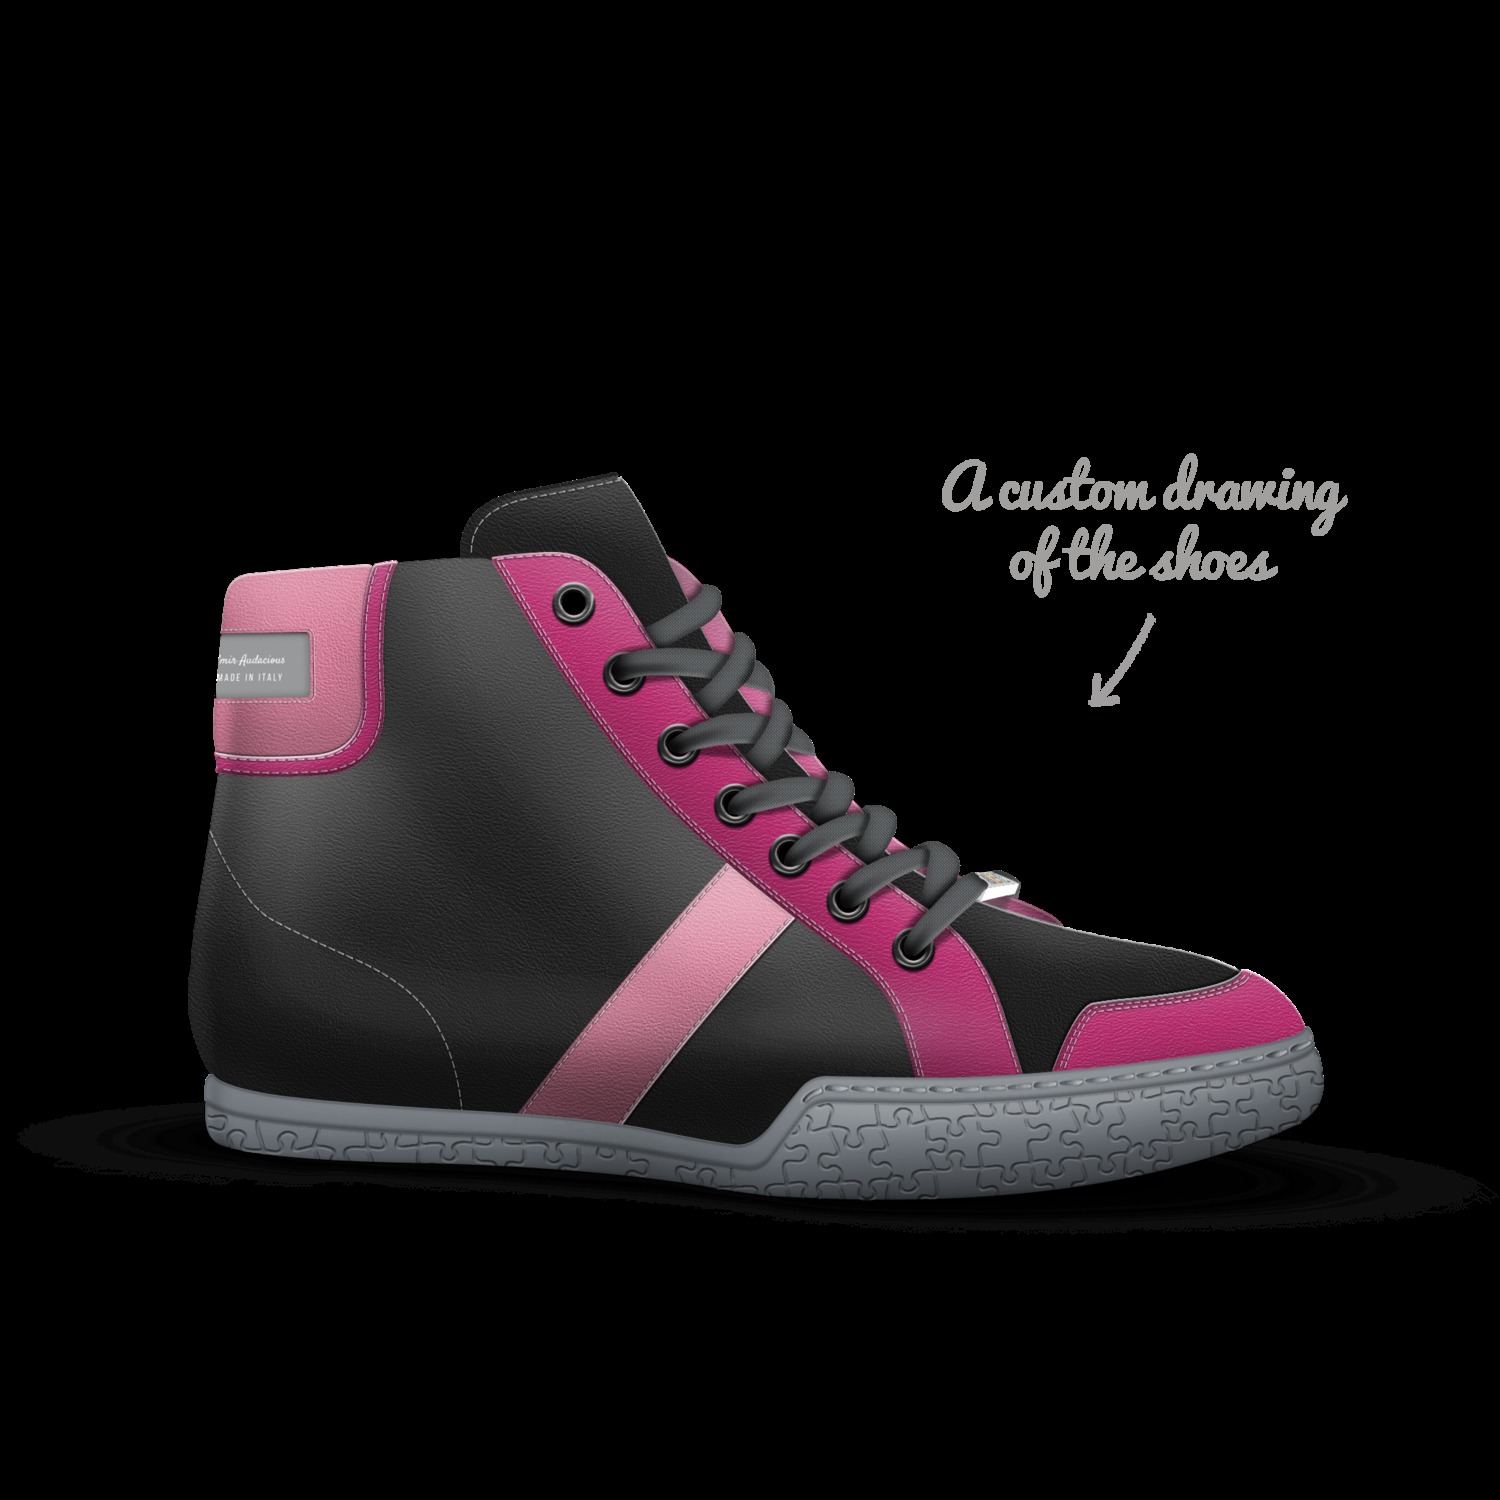 A Custom Shoe concept by Layton Price